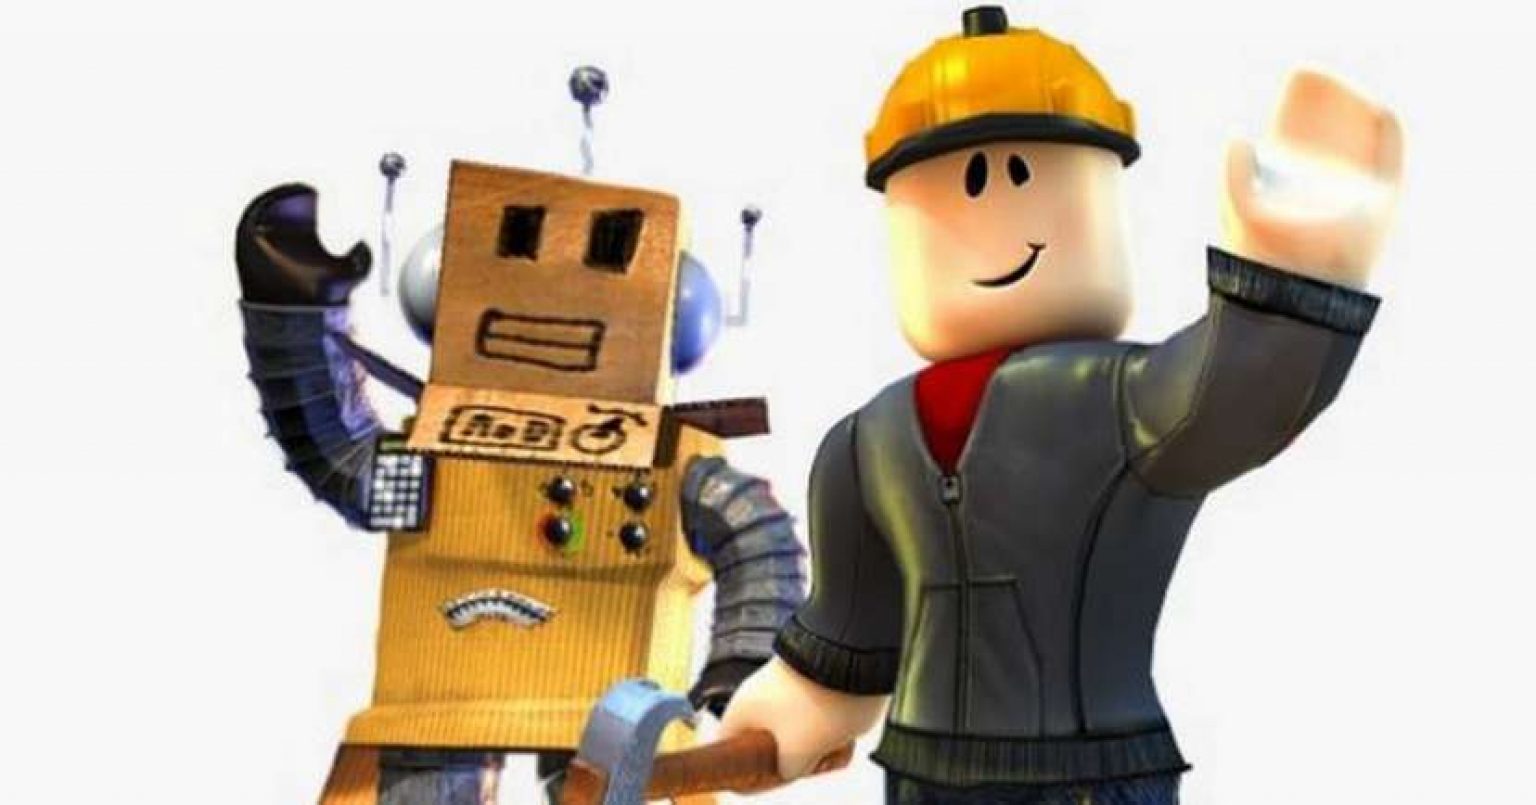 download roblox for pc windows 7 free